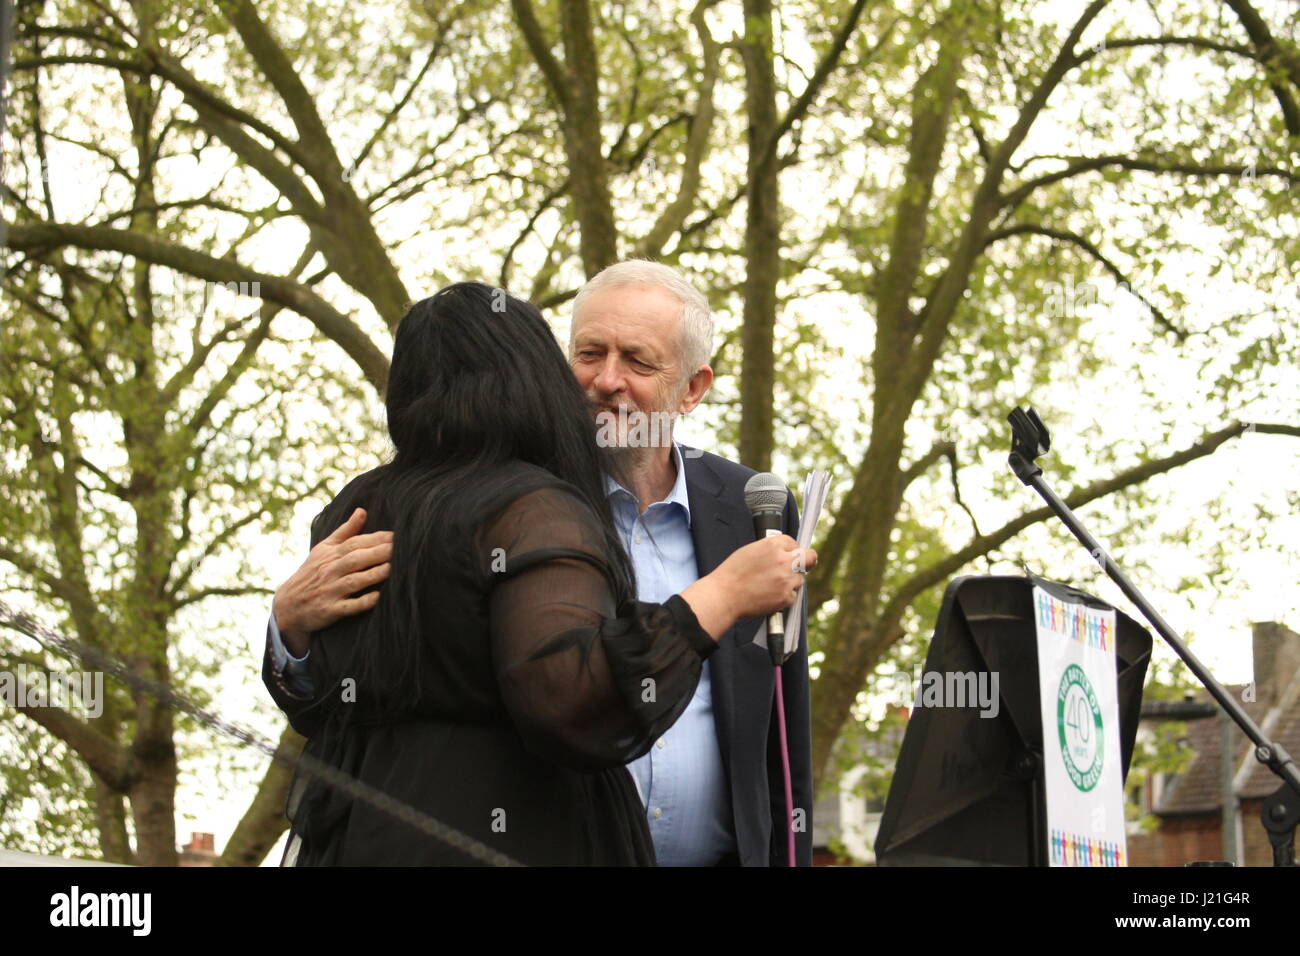 London, UK. 23rd April, 2017. Labour Party leader, Jeremy Corbyn is greeted at an event 'Haringey Diversity Celebration' held to mark the 40th anniversary of a protest that blocked the National Front marching through the area. Roland Ravenhill/ Alamy Live News Stock Photo